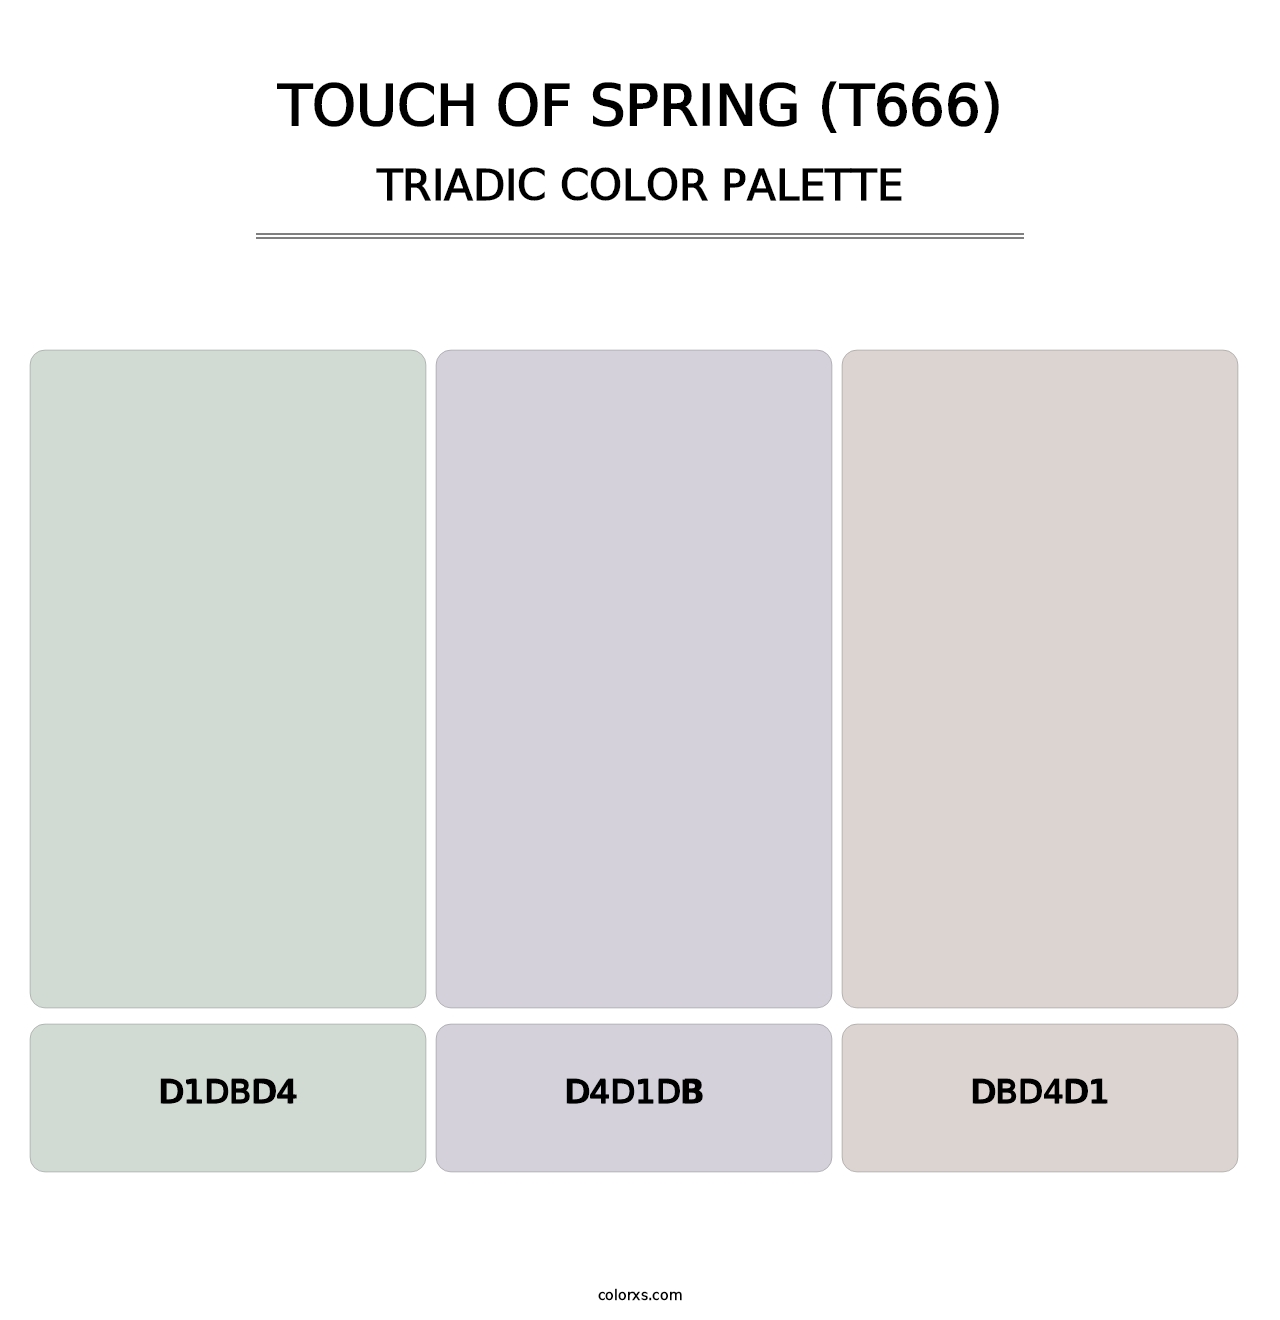 Touch of Spring (T666) - Triadic Color Palette